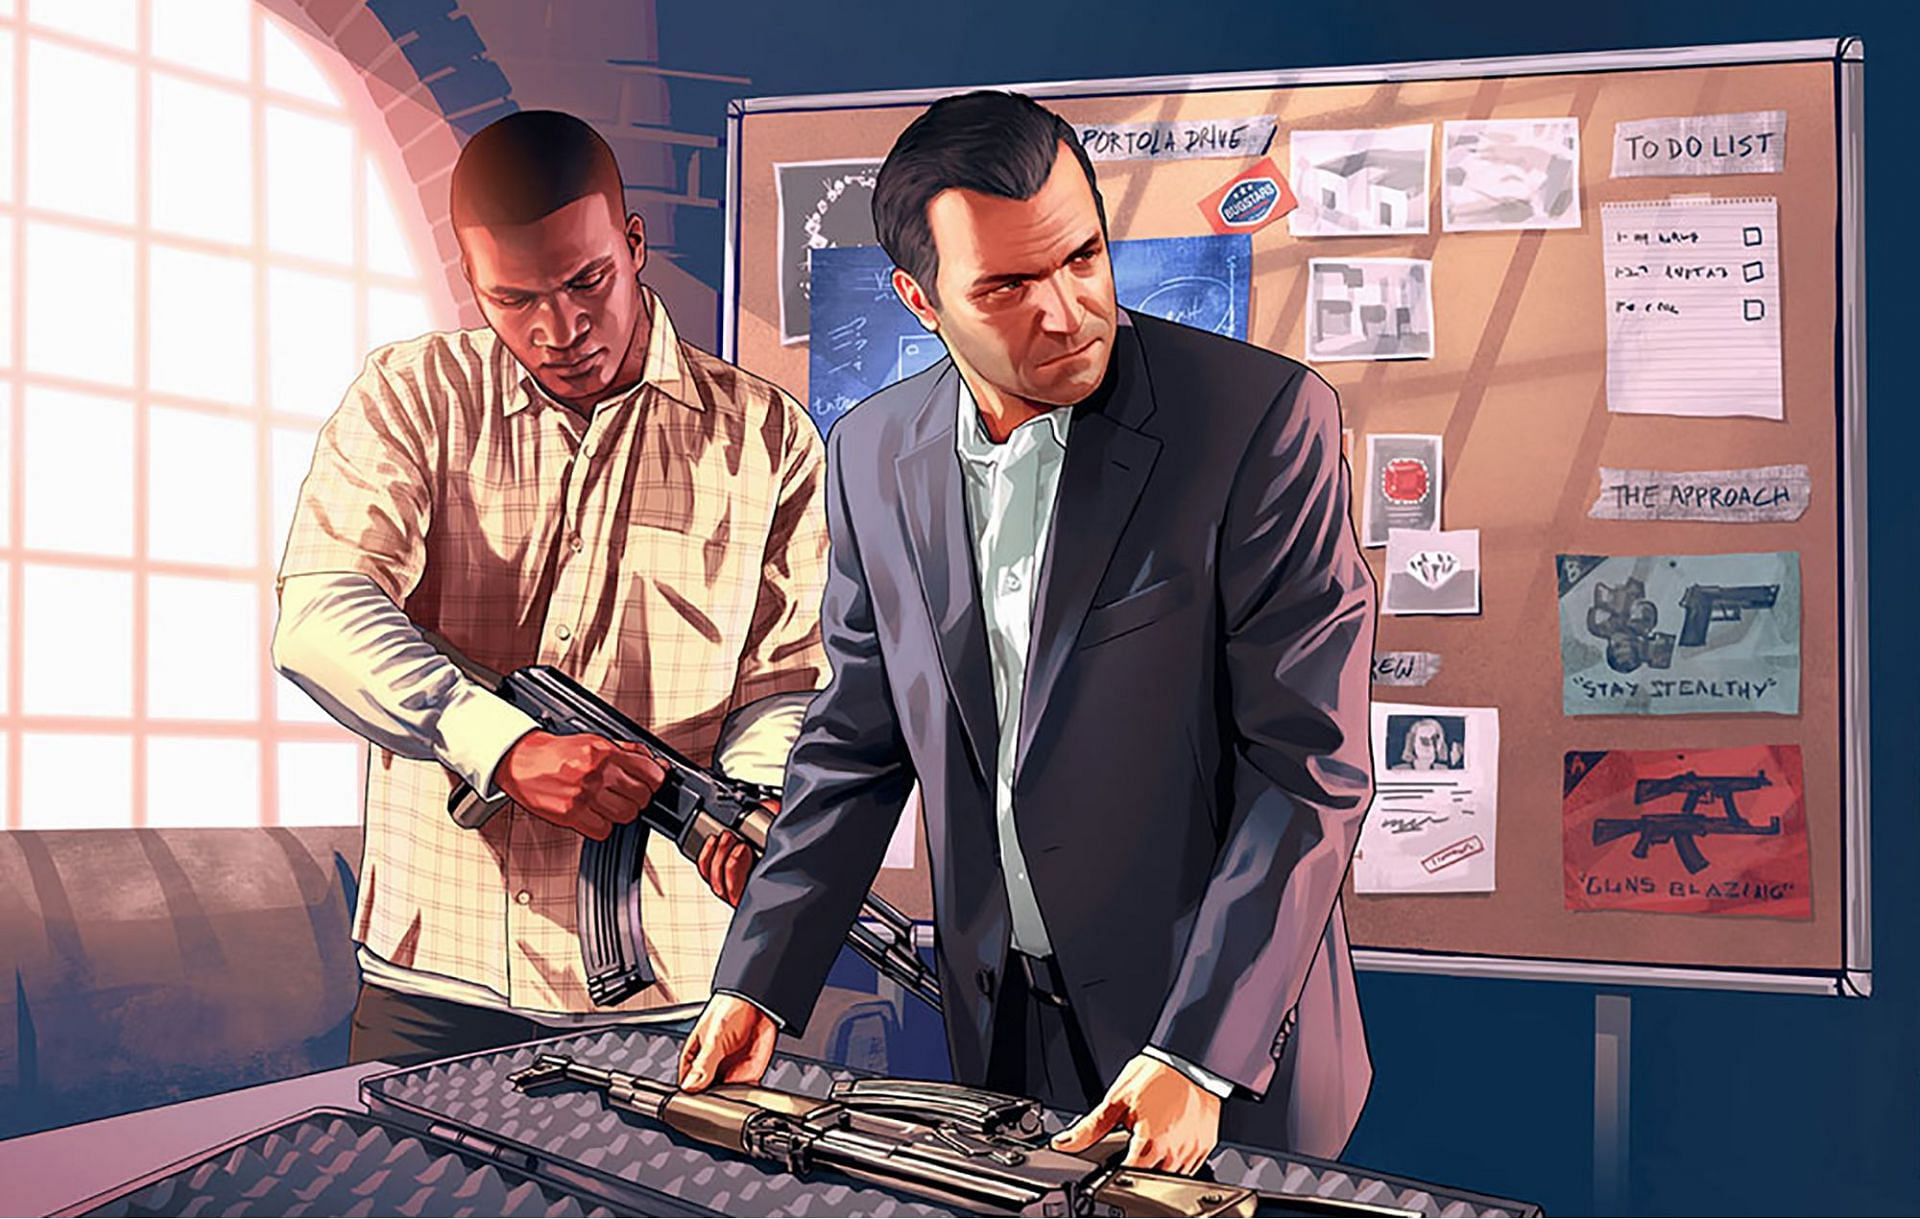 GTA 5 2022, Preloads on the PS5 and Xbox Series X|S have begun (Image via NME)